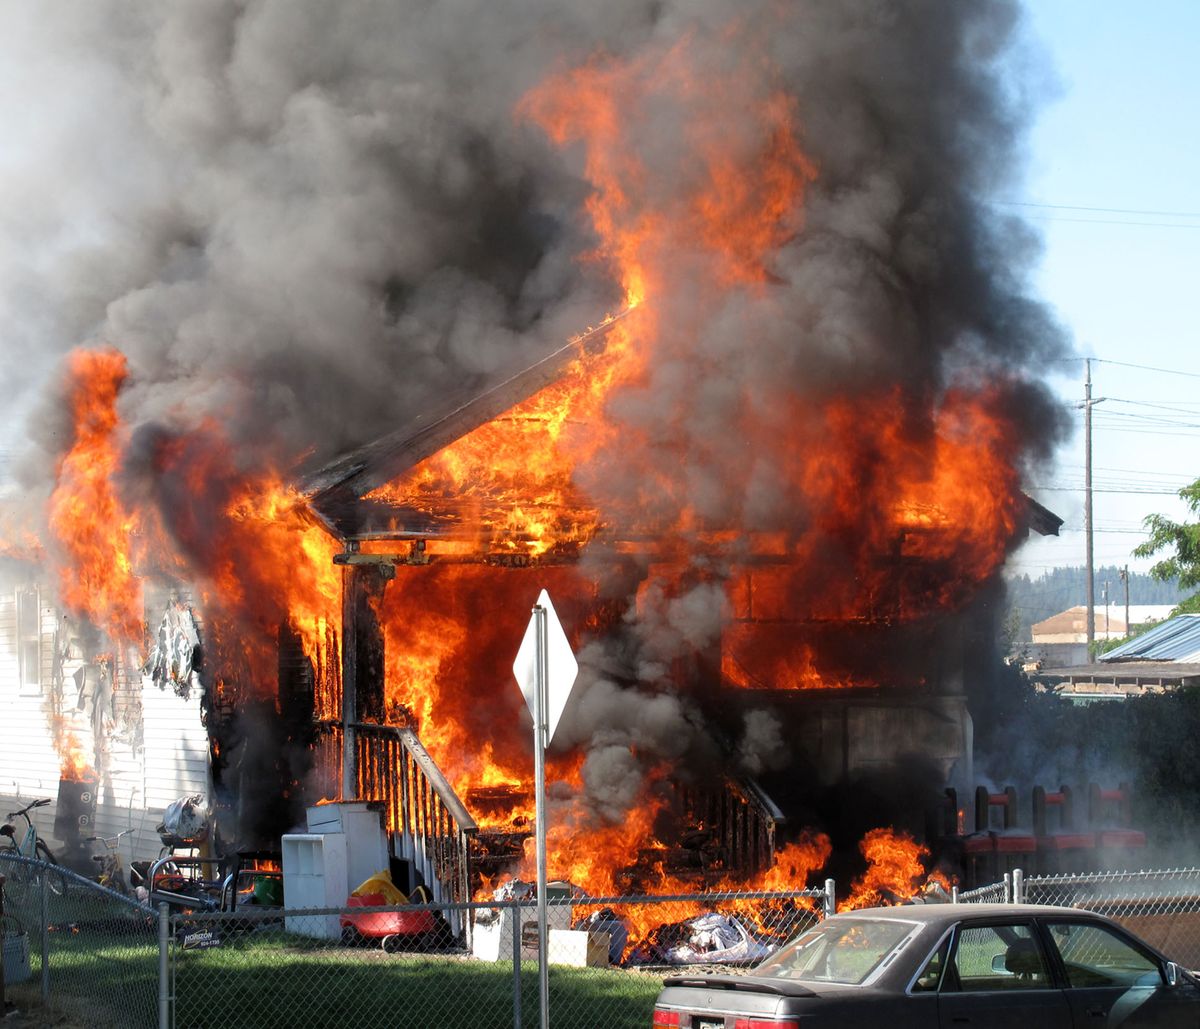 Fire engulfs the front end of a rental house on the 5400 block of east Commerce, July 2, 2009 in Spokane, Wash.  Kate Williams, a neighbor from across the street, snapped the photo with her digital camera.    (Kate Williams / Courtesy photo)